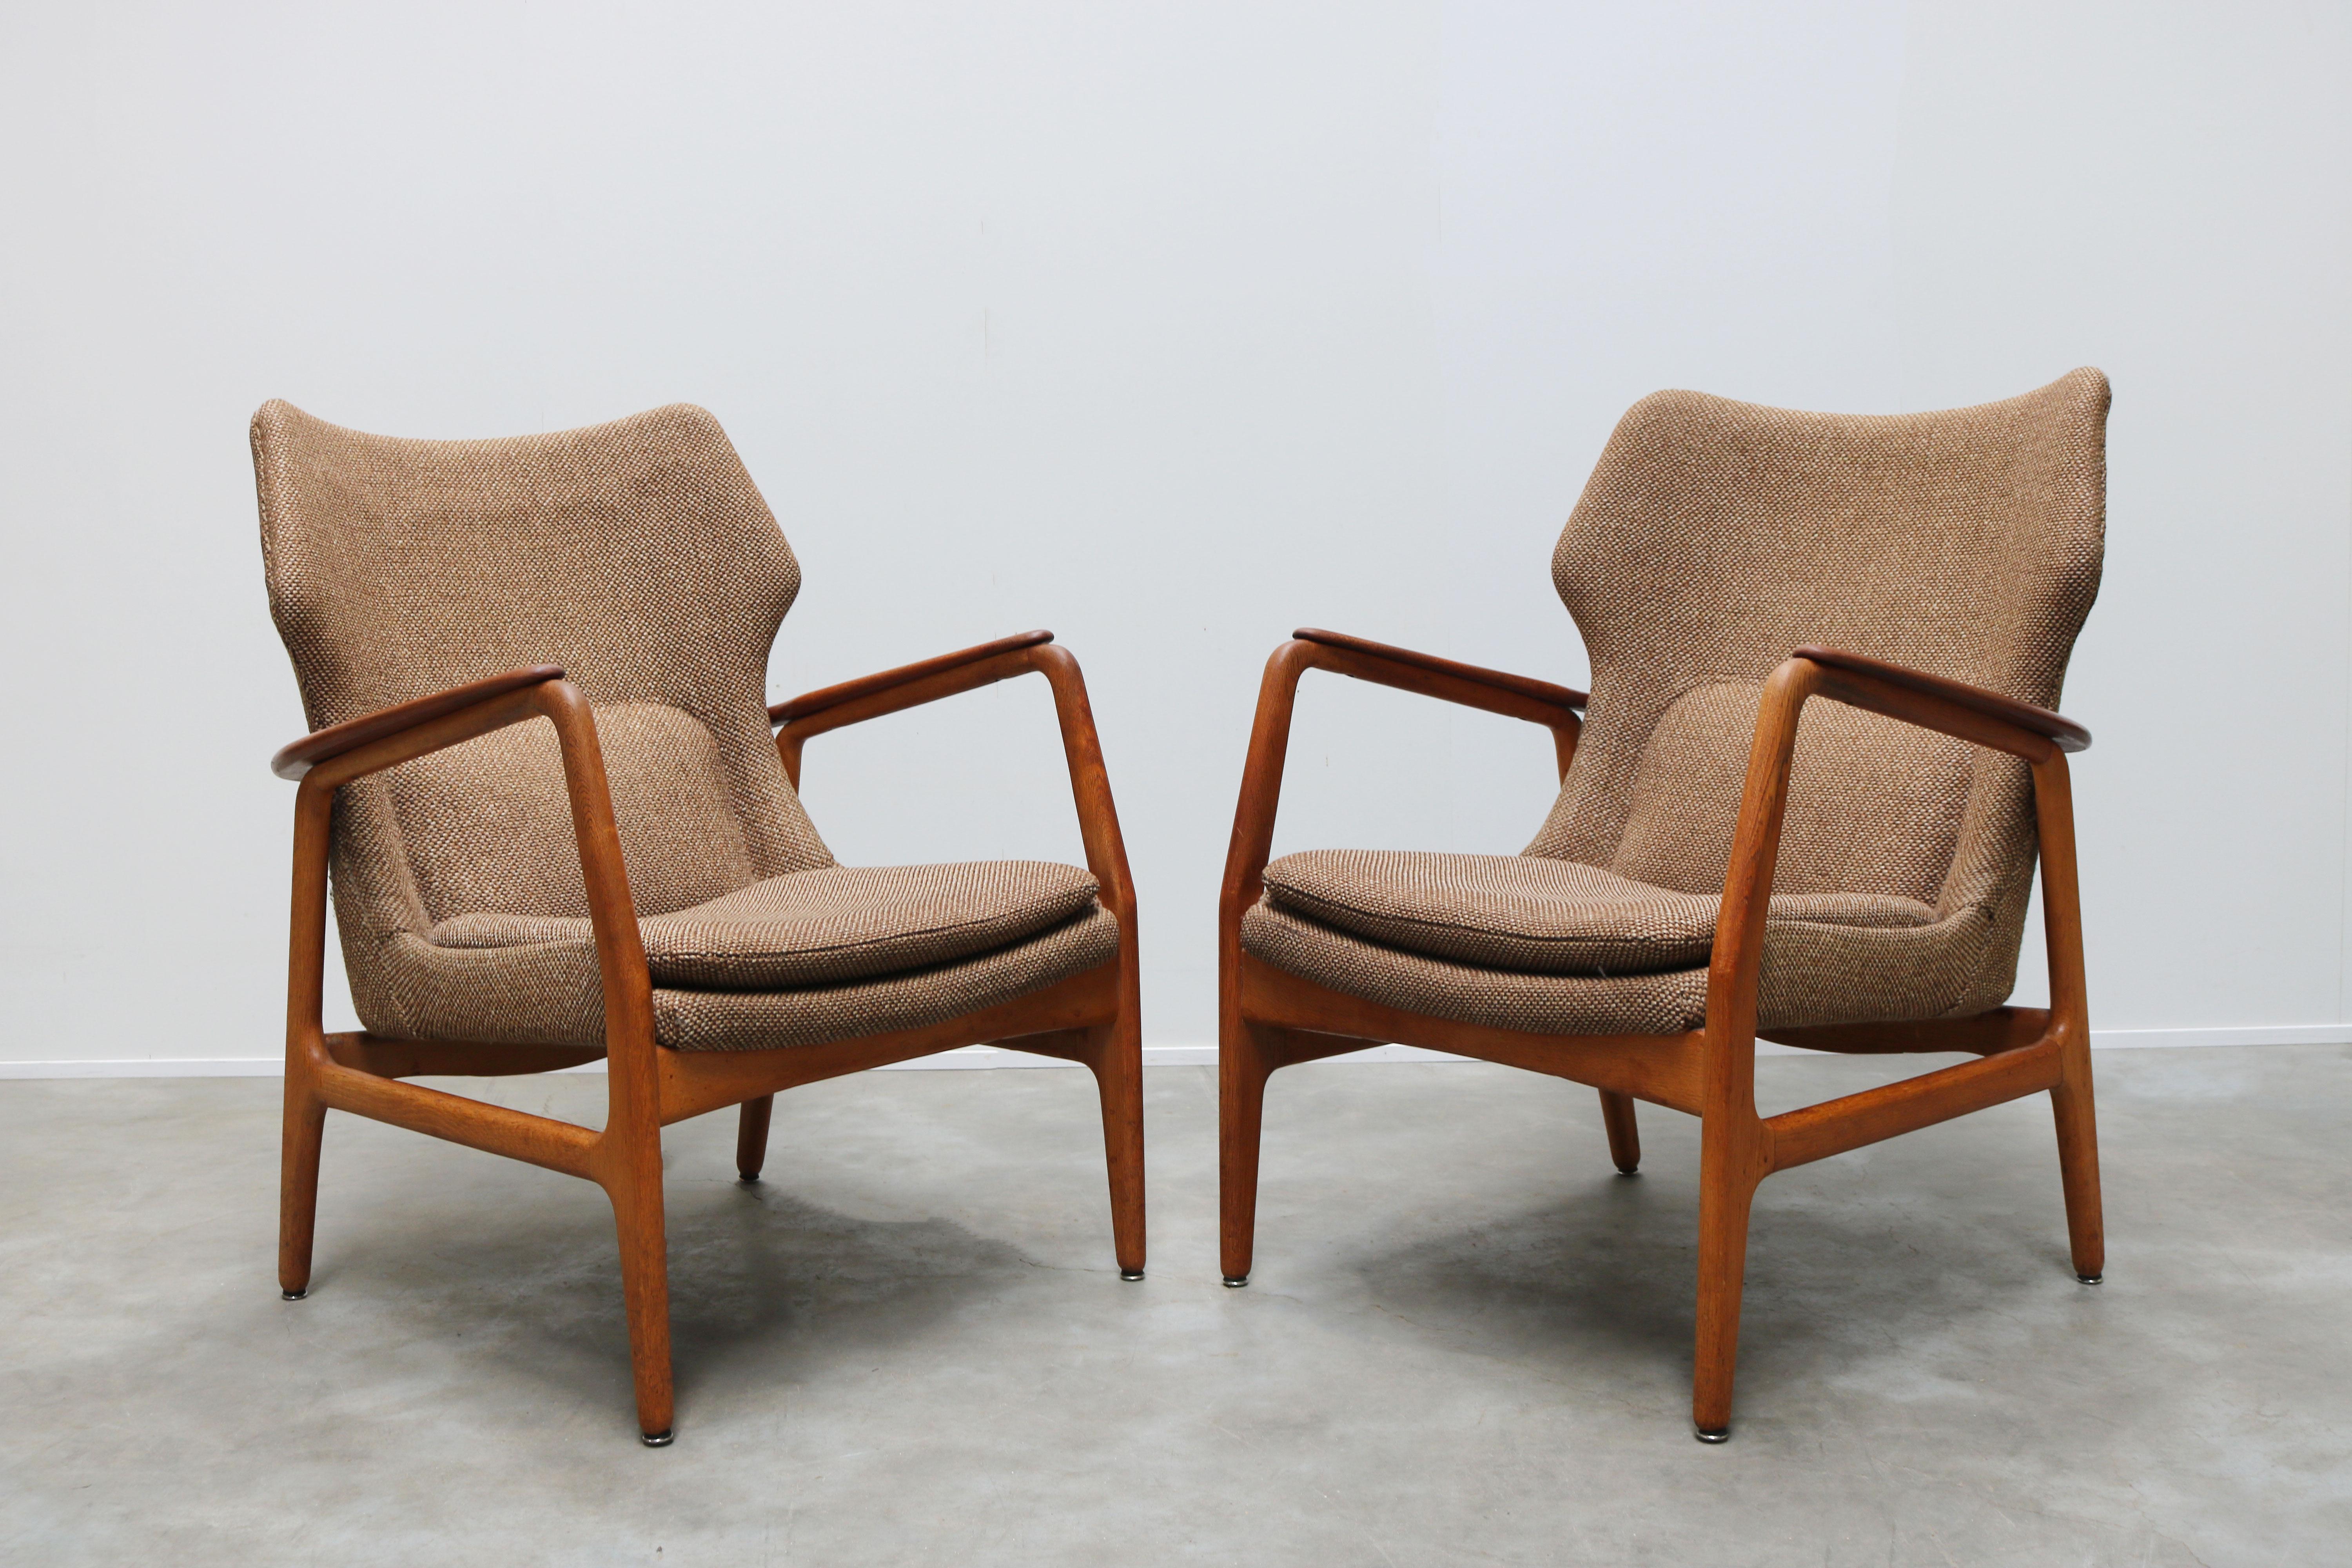 Magnificent pair of Danish ''wingback'' lounge chairs designed by the famous Danish designer: Aksel Bender Madsen for Bovenkamp furniture in the 1950s. The lounge chairs have a very royal and warm look, its smooth lines always draw your eyes towards